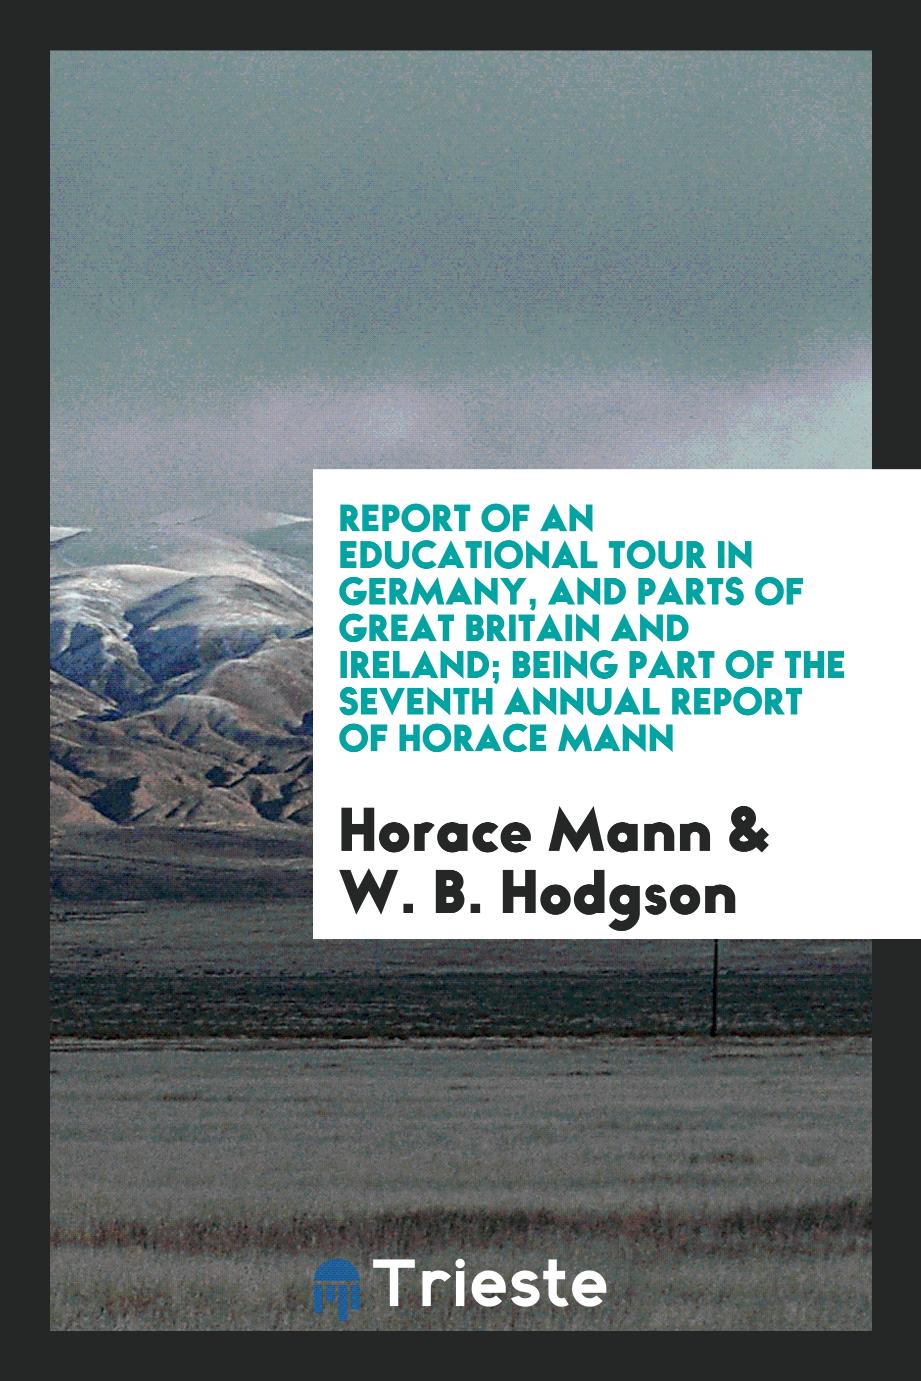 Report of an educational tour in Germany, and parts of Great Britain and Ireland; being part of the seventh annual report of Horace Mann